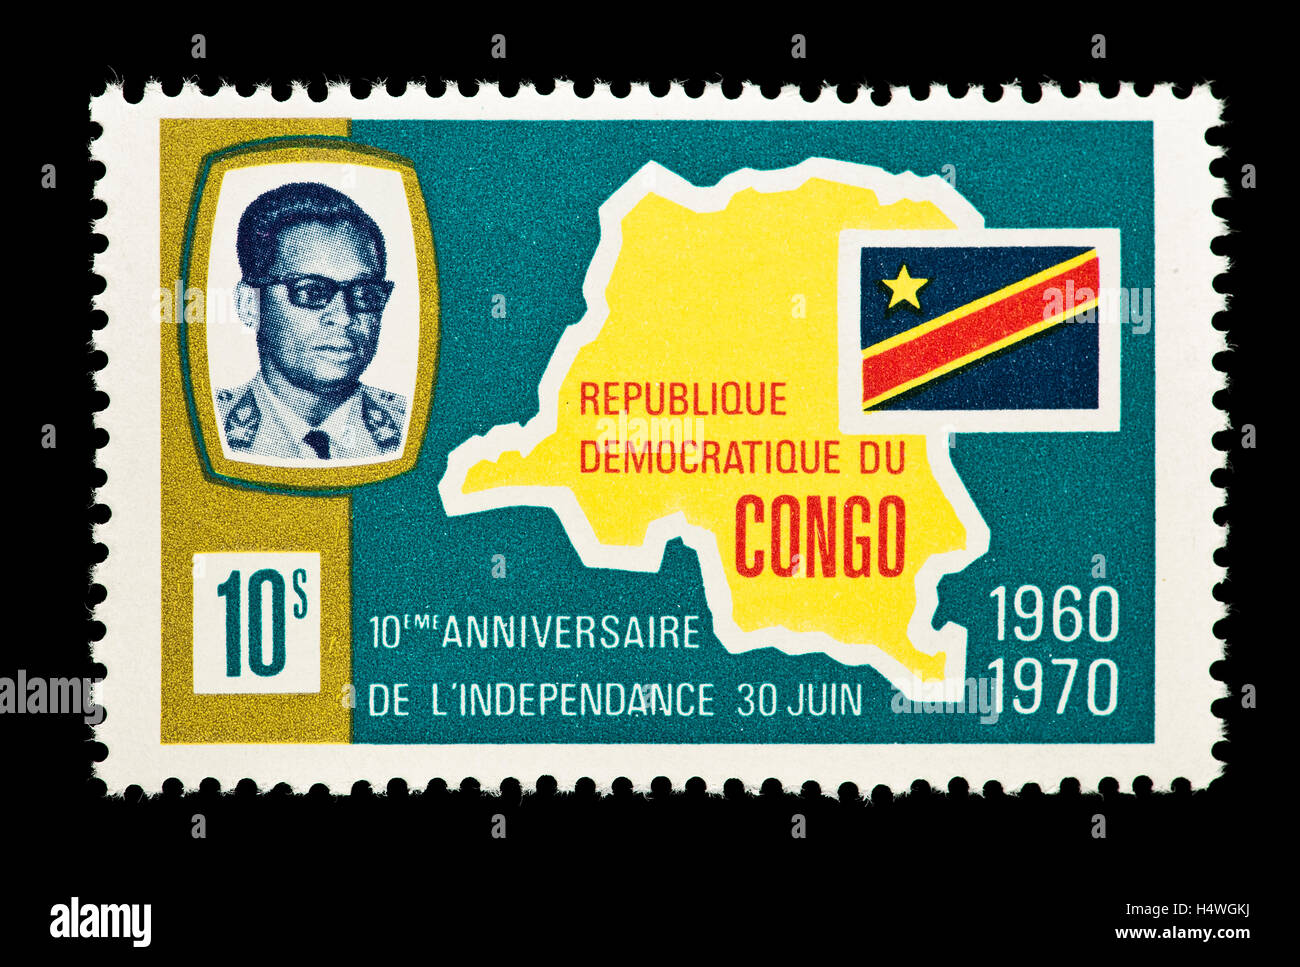 Postage stamp from Congo depicting President Mobutu, country map and flag, 10'th anniversary of independence. Stock Photo